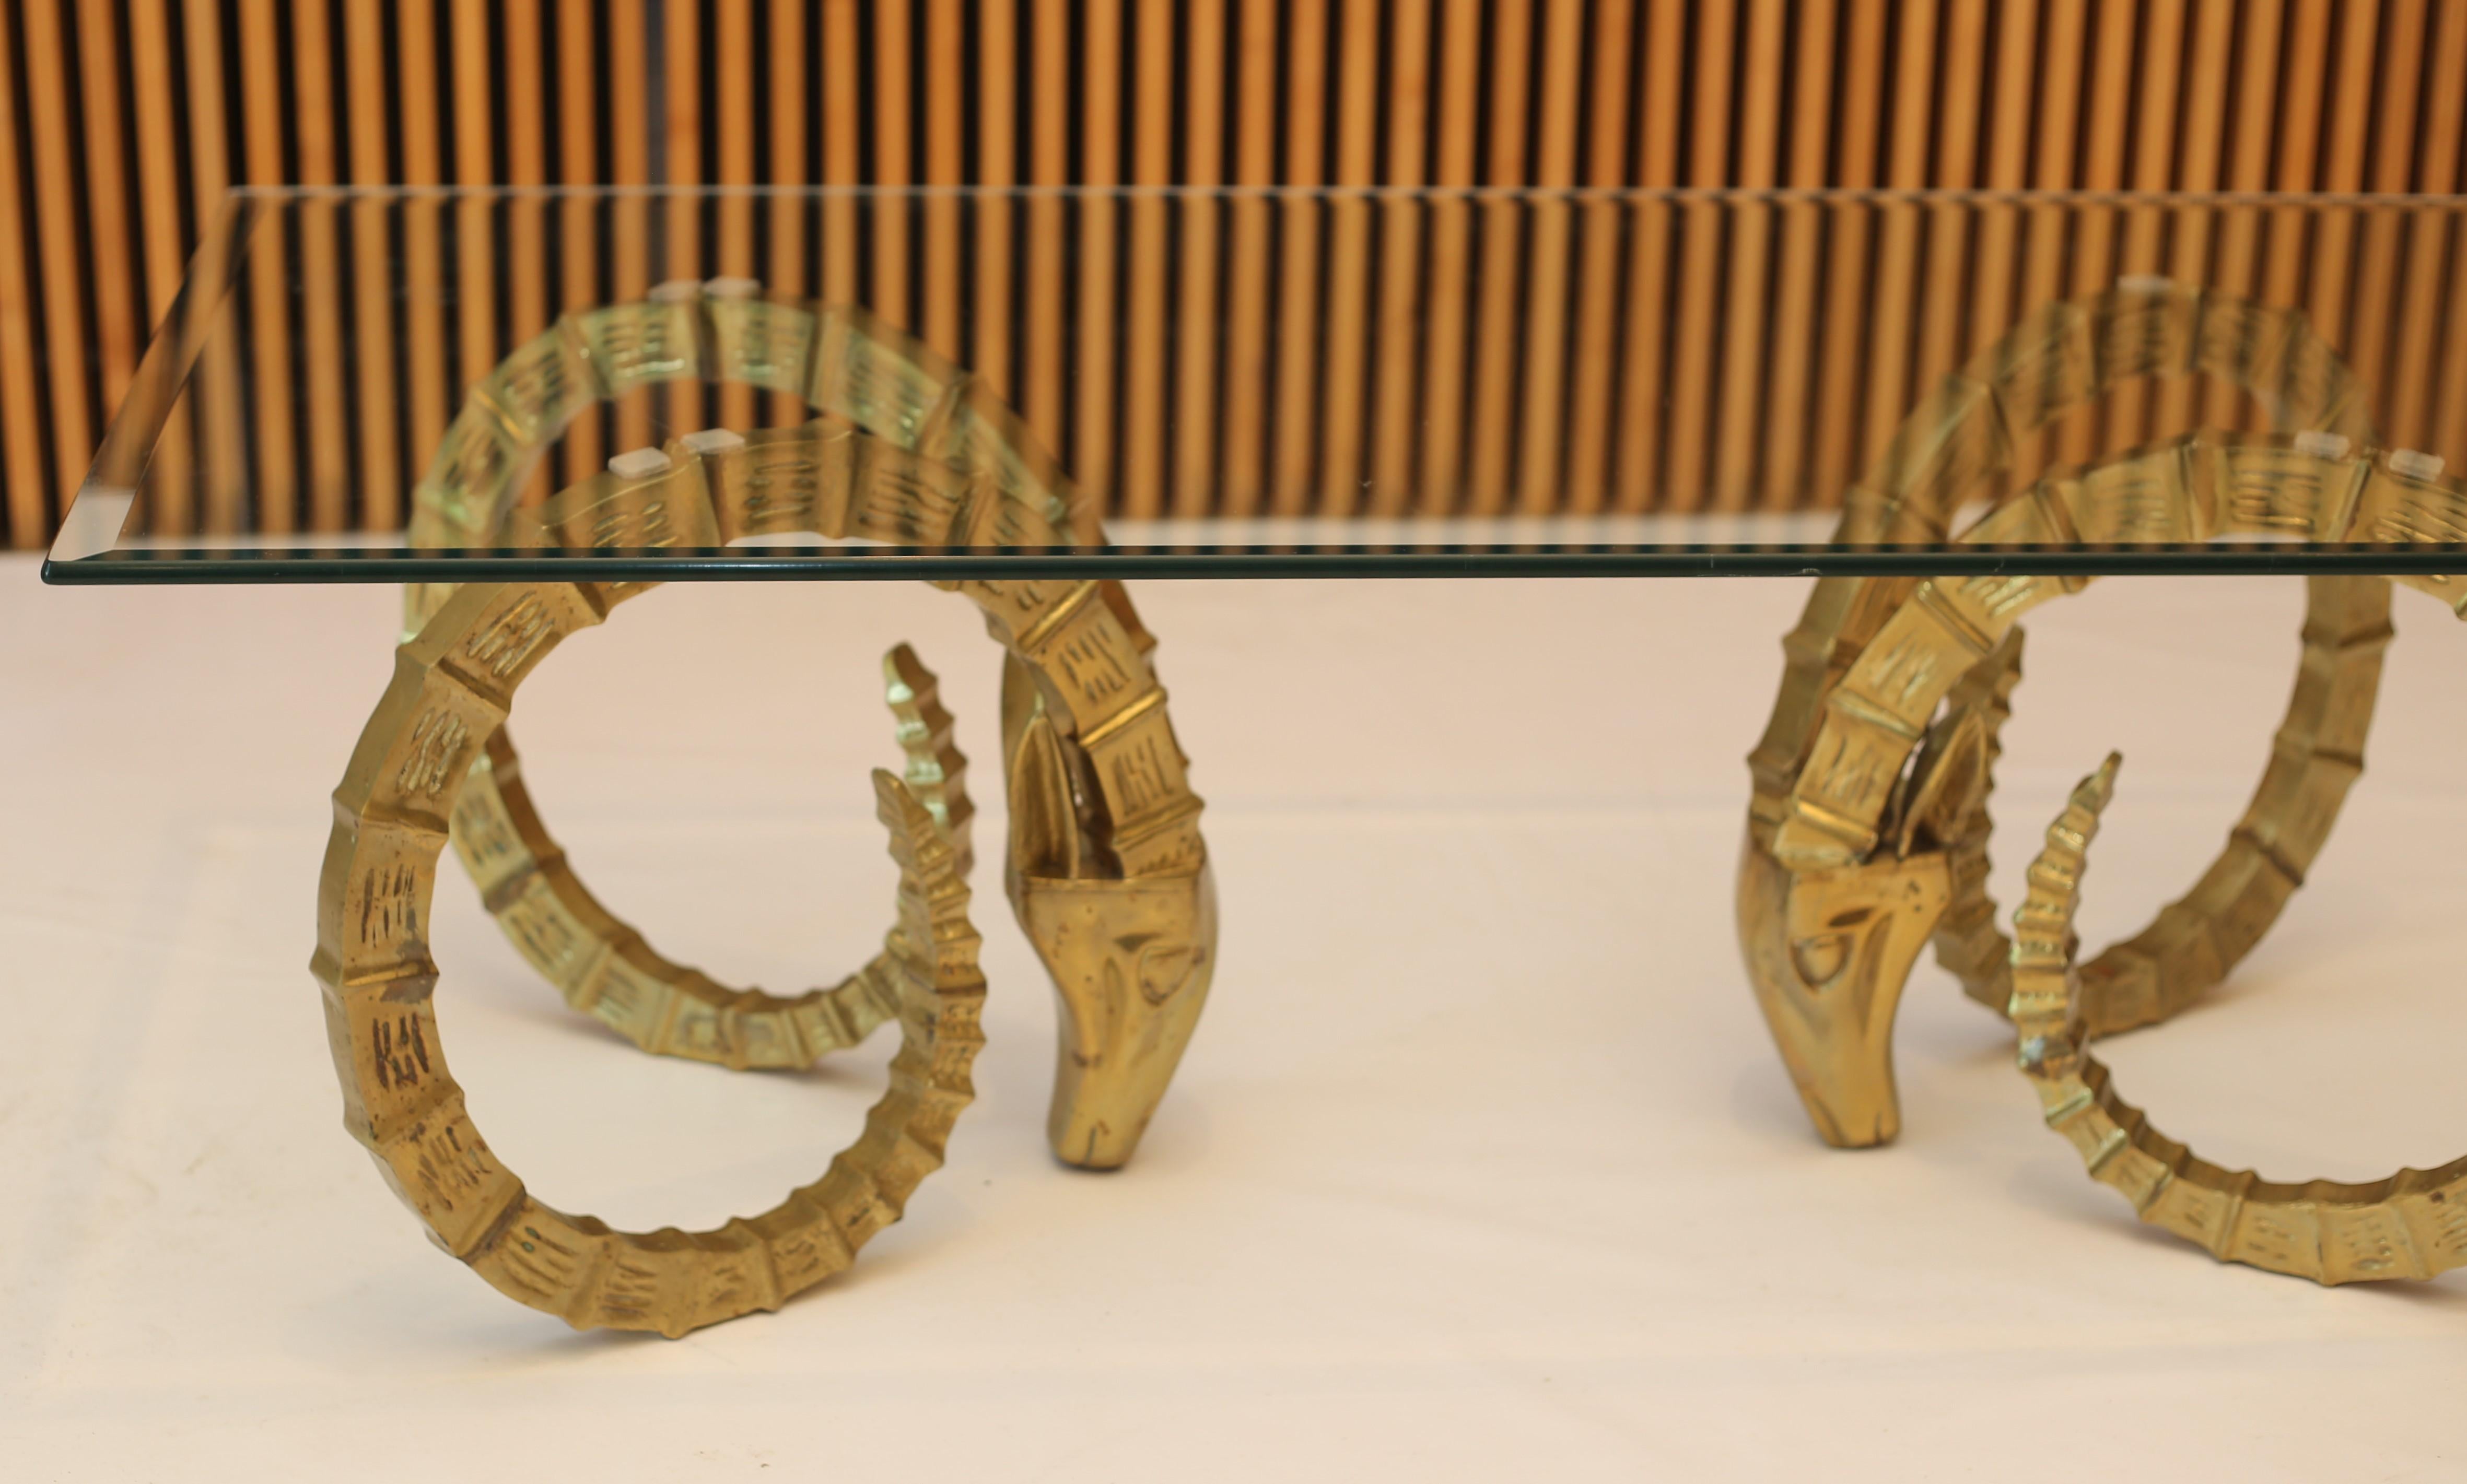 A striking Mid-Century Modern solid brass ibex or ram's head coffee table with glass top from the 1970s. The rectangular glass top shows very well and features a bevelled edge. The brass shows great patina with some Verdigris spots and darker spots.